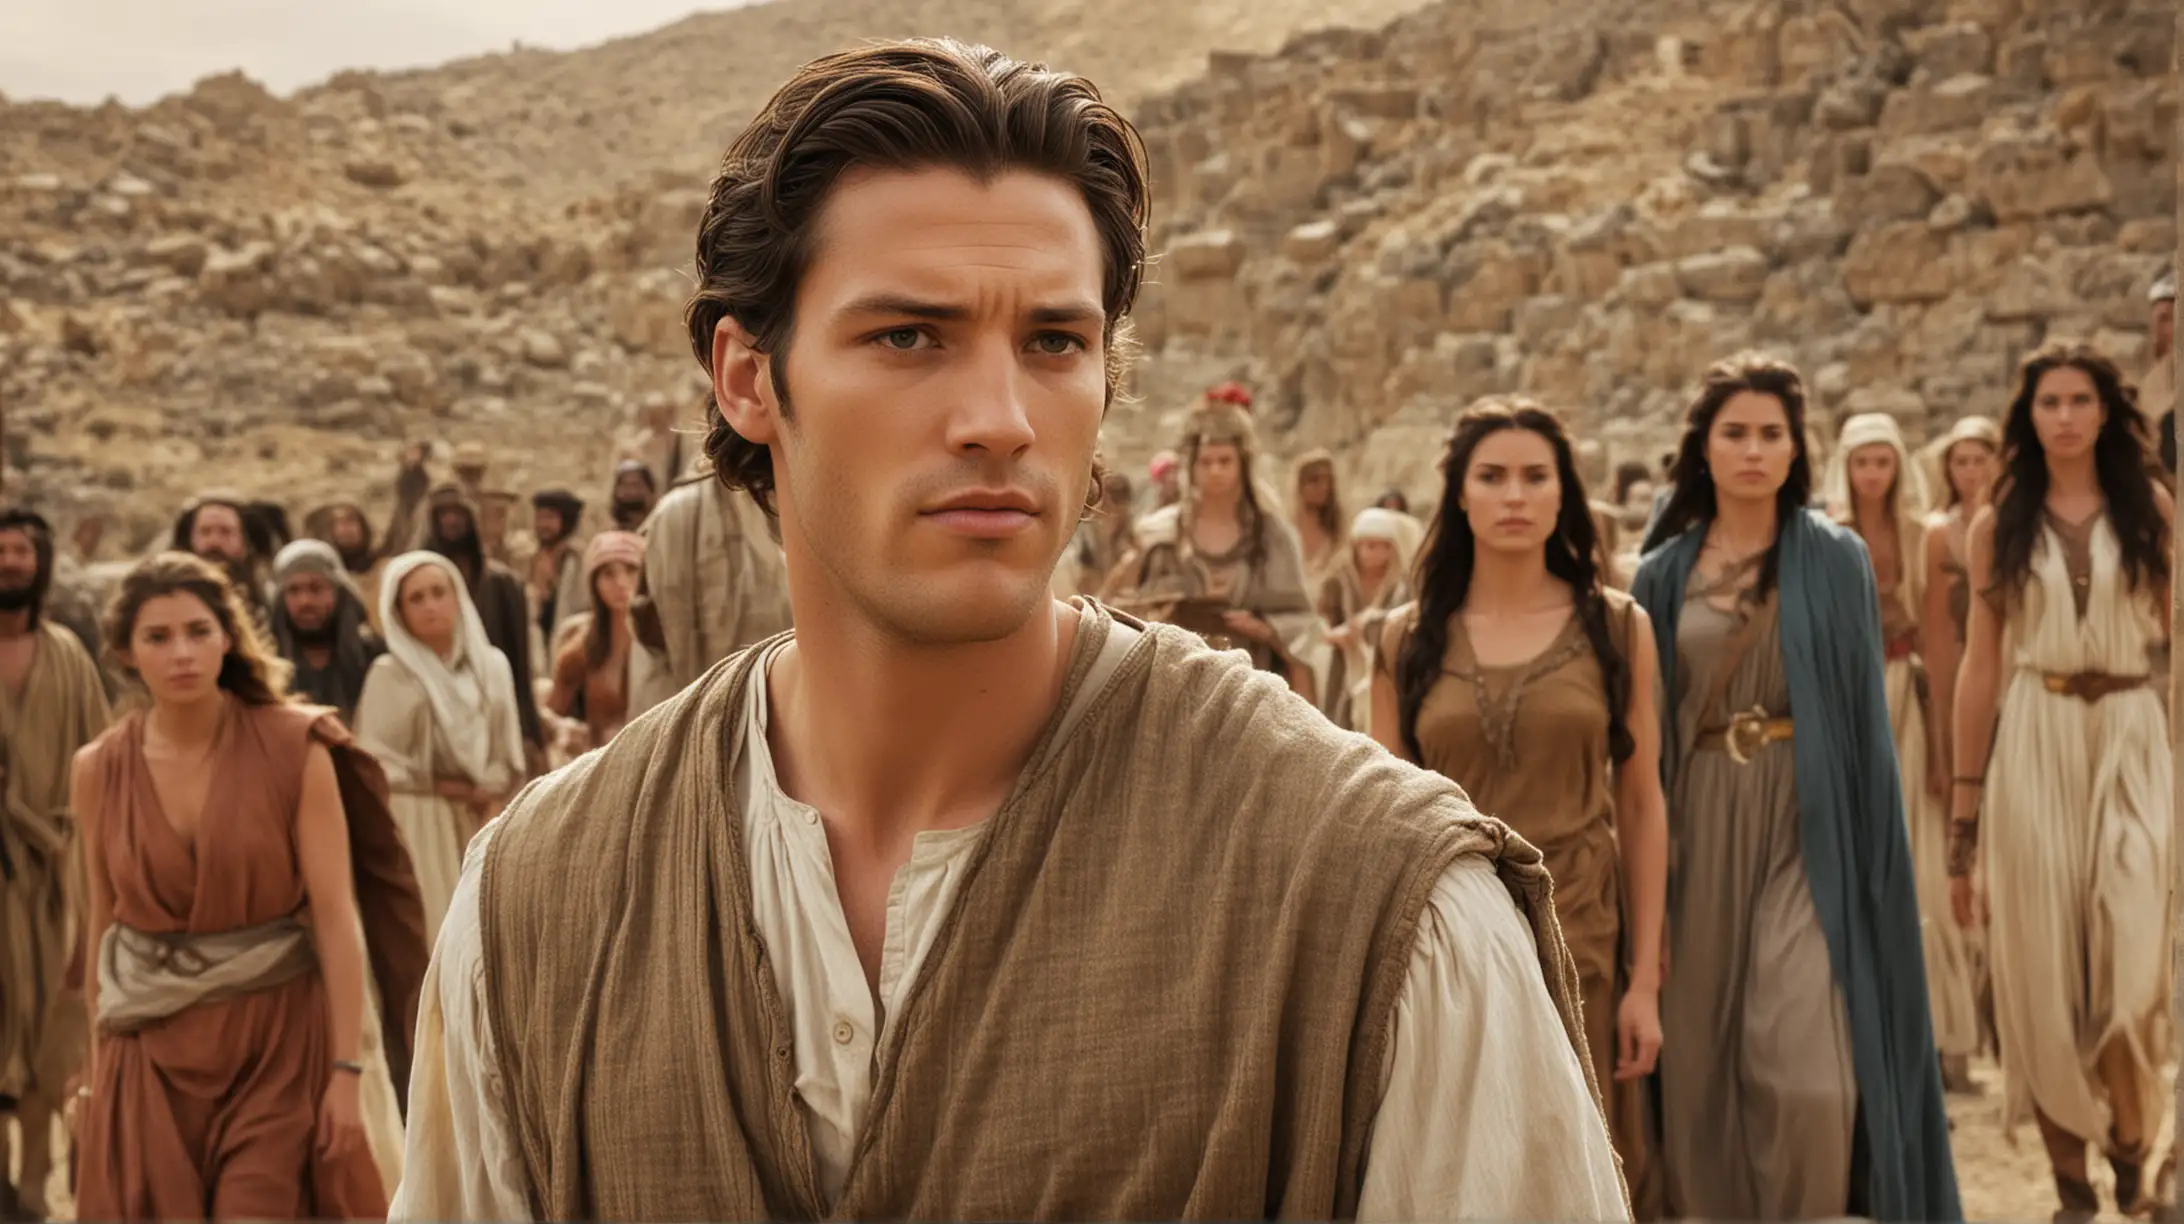 Handsome Leader Surrounded by Admirers Biblical Era Scene